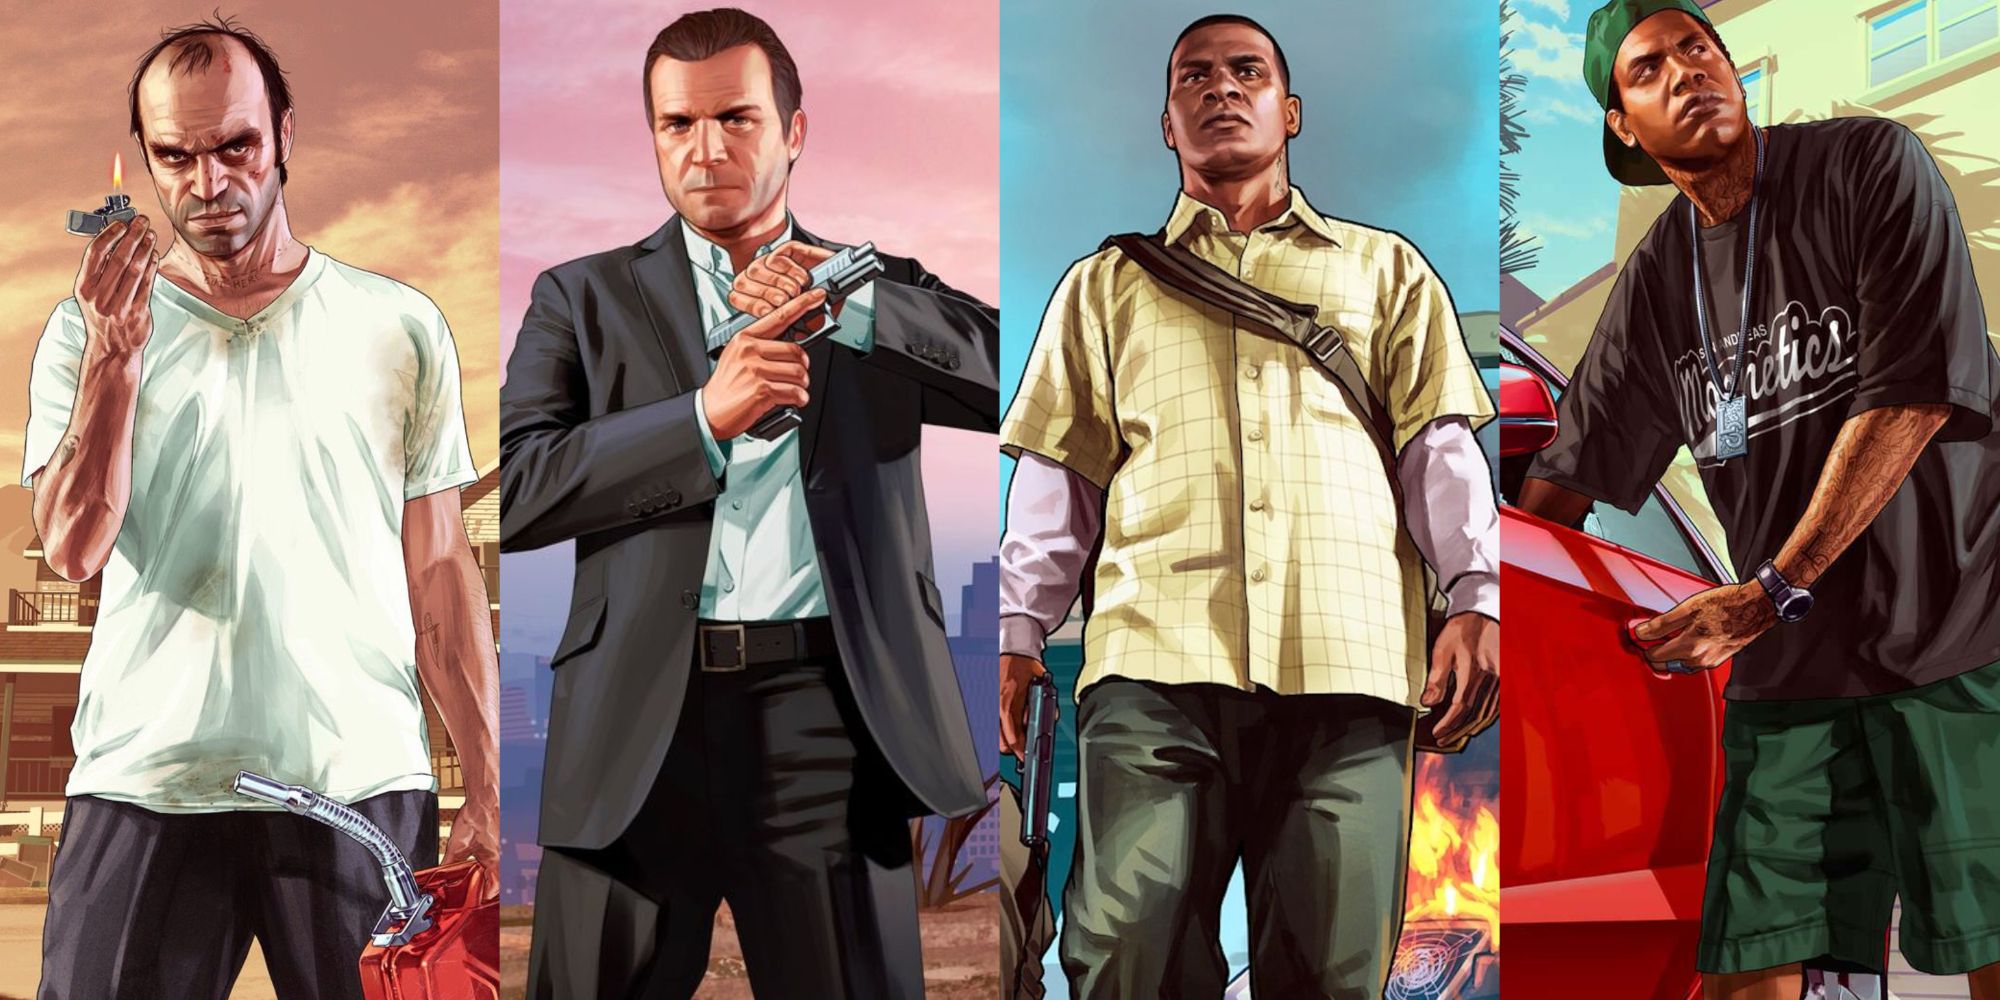 Who is the youngest GTA player?